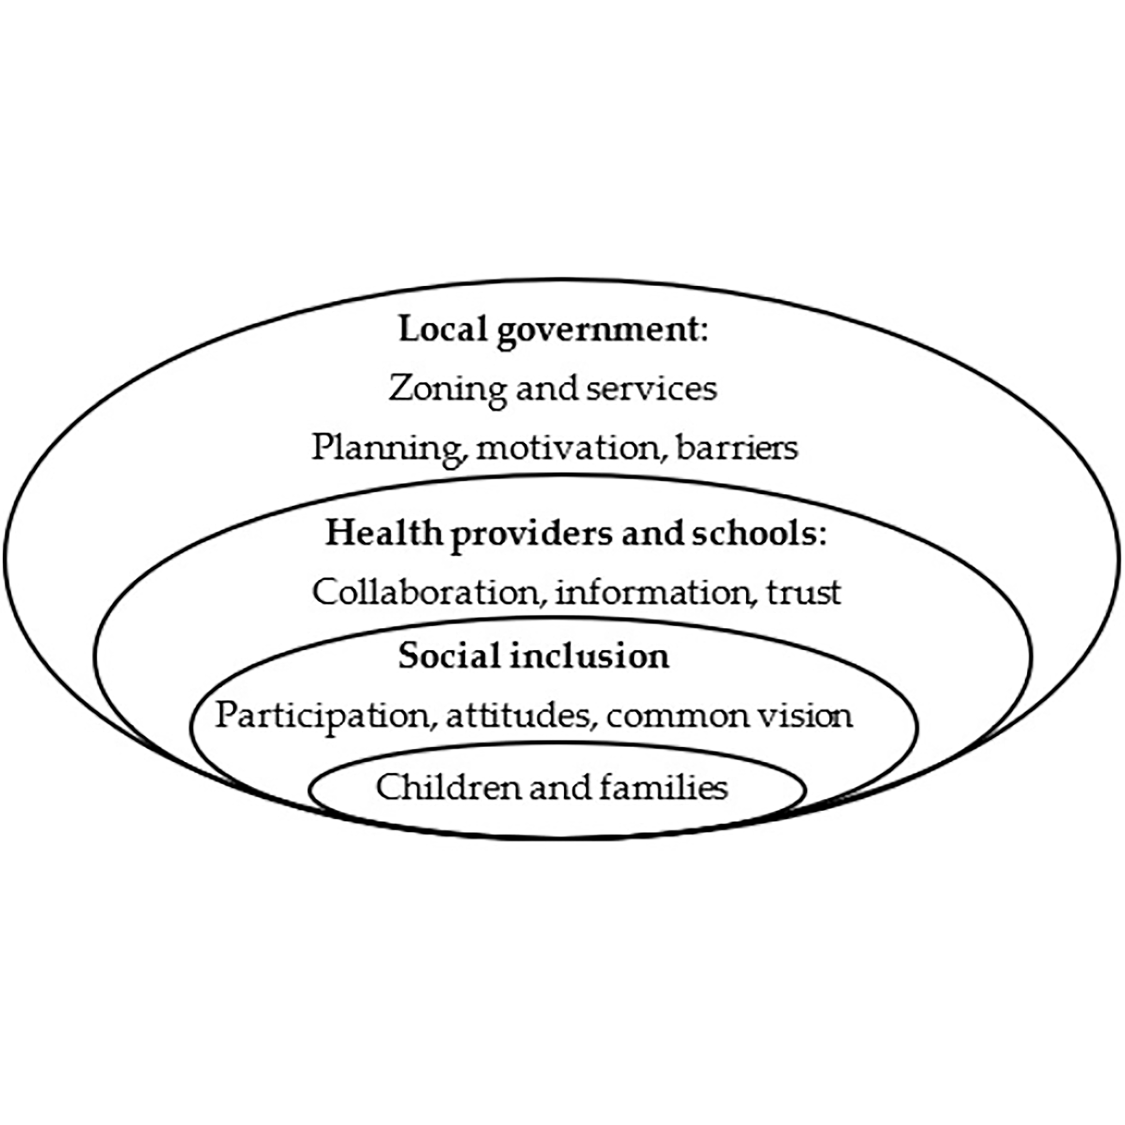 Concentric circles showing scales from local government, health providers and schools, social inclusion and children and families